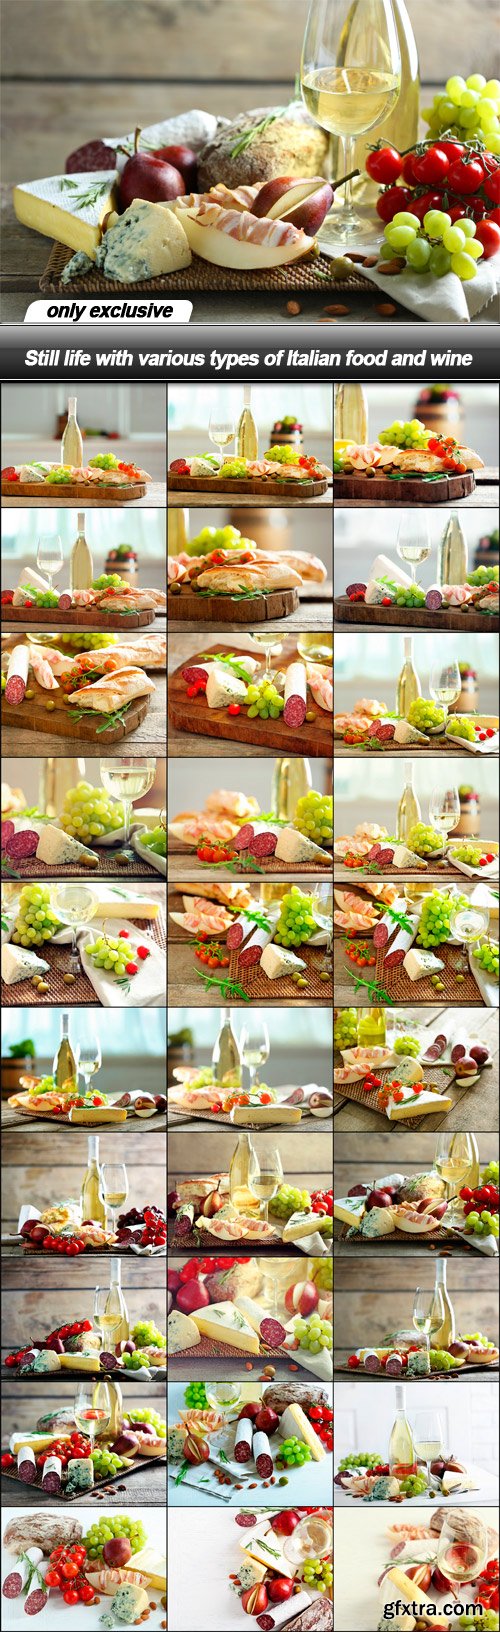 Still life with various types of Italian food and wine - 30 UHQ JPEG